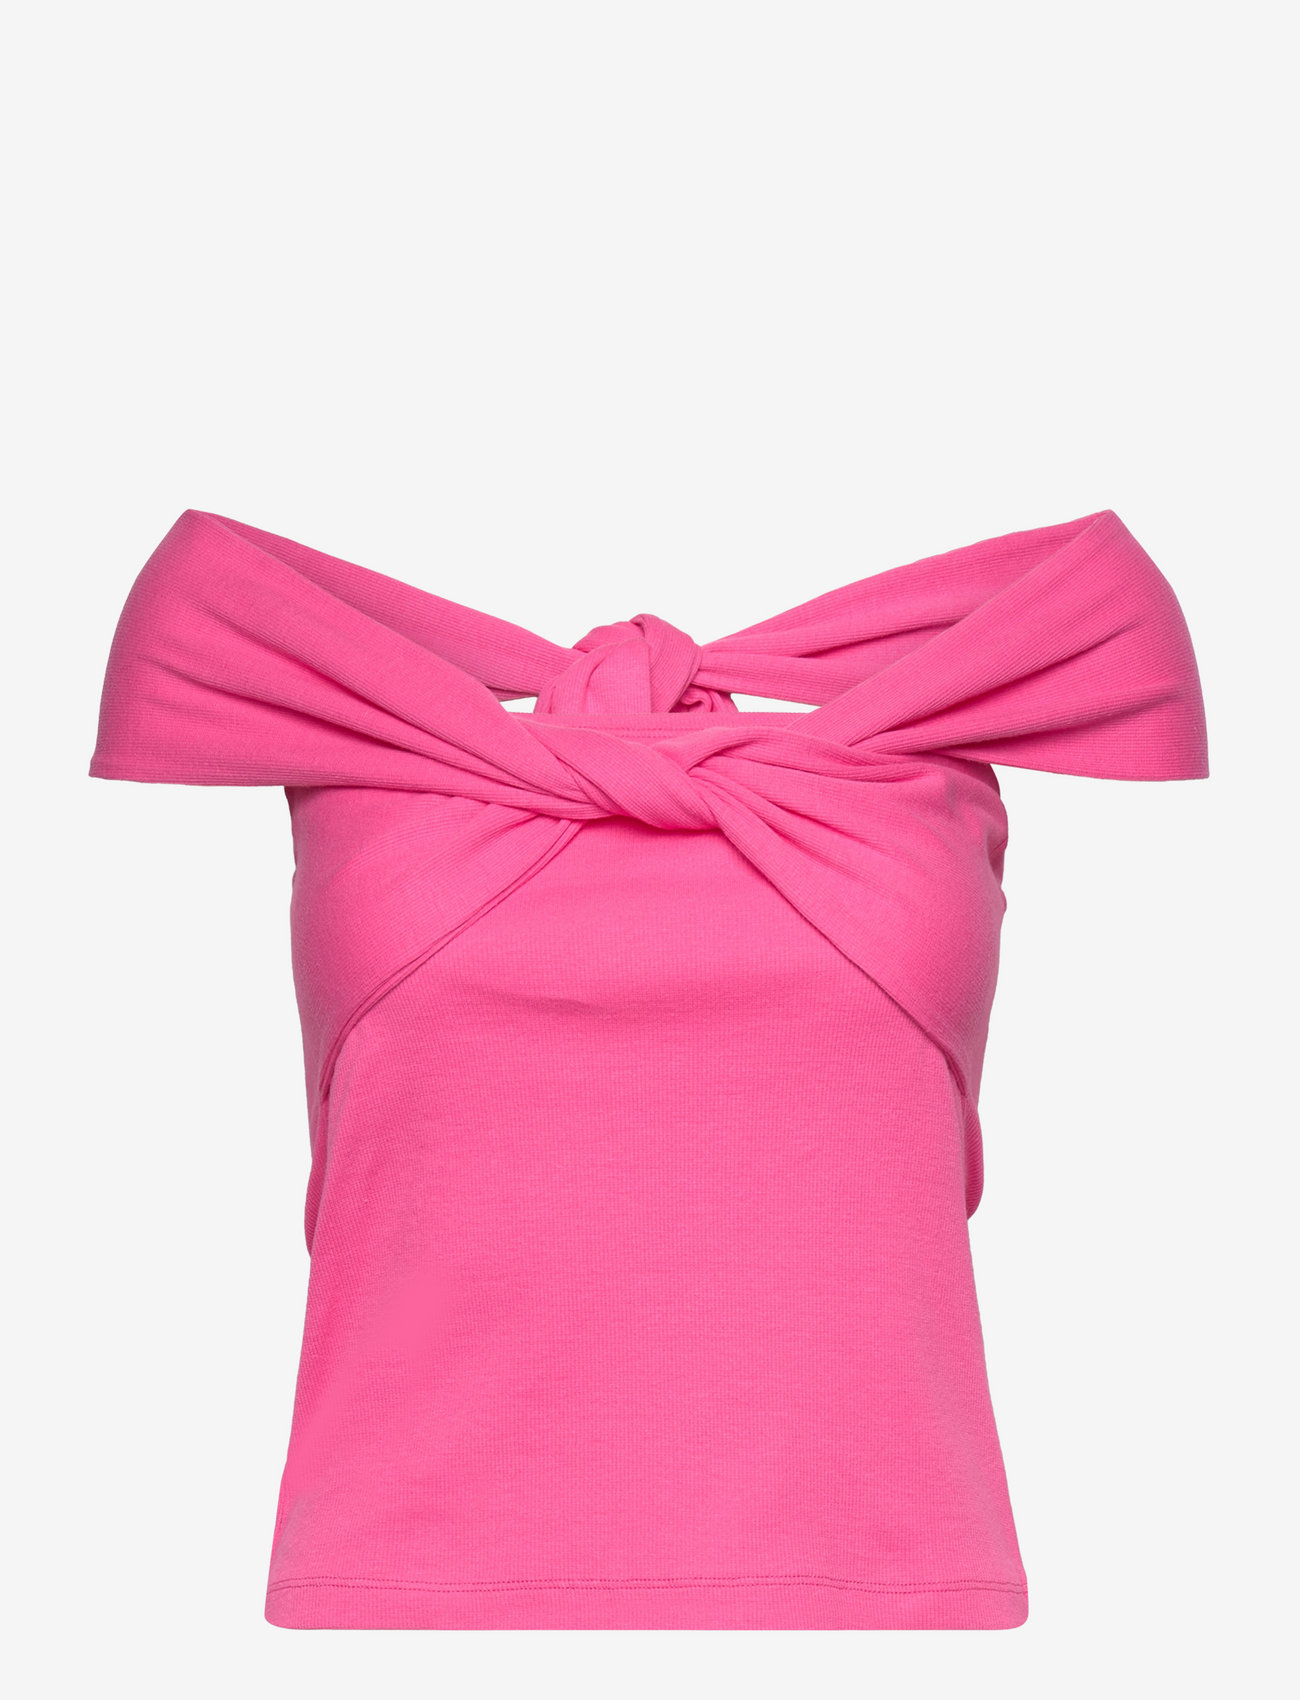 bzr - Fiona Crossover top - sleeveless tops - pink - 0